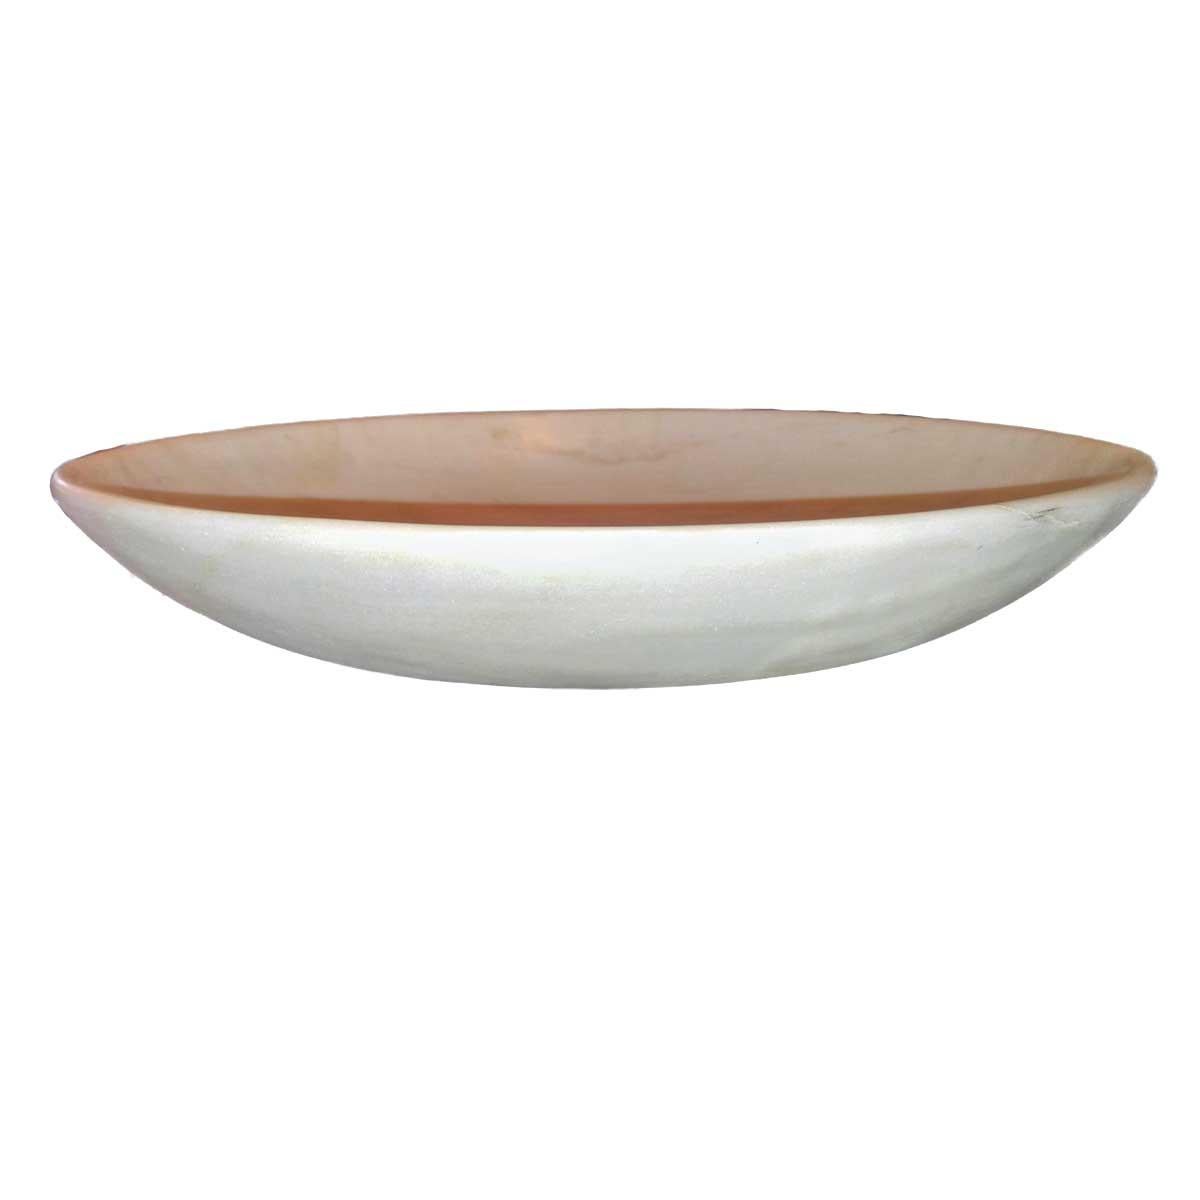 An elegant white marble parat bowl from India. Traditionally used in Indian households from kneading dough, this large parat bowl is a stunning decorative item as a centrepiece, serving bowl or just an eye-catching accent.